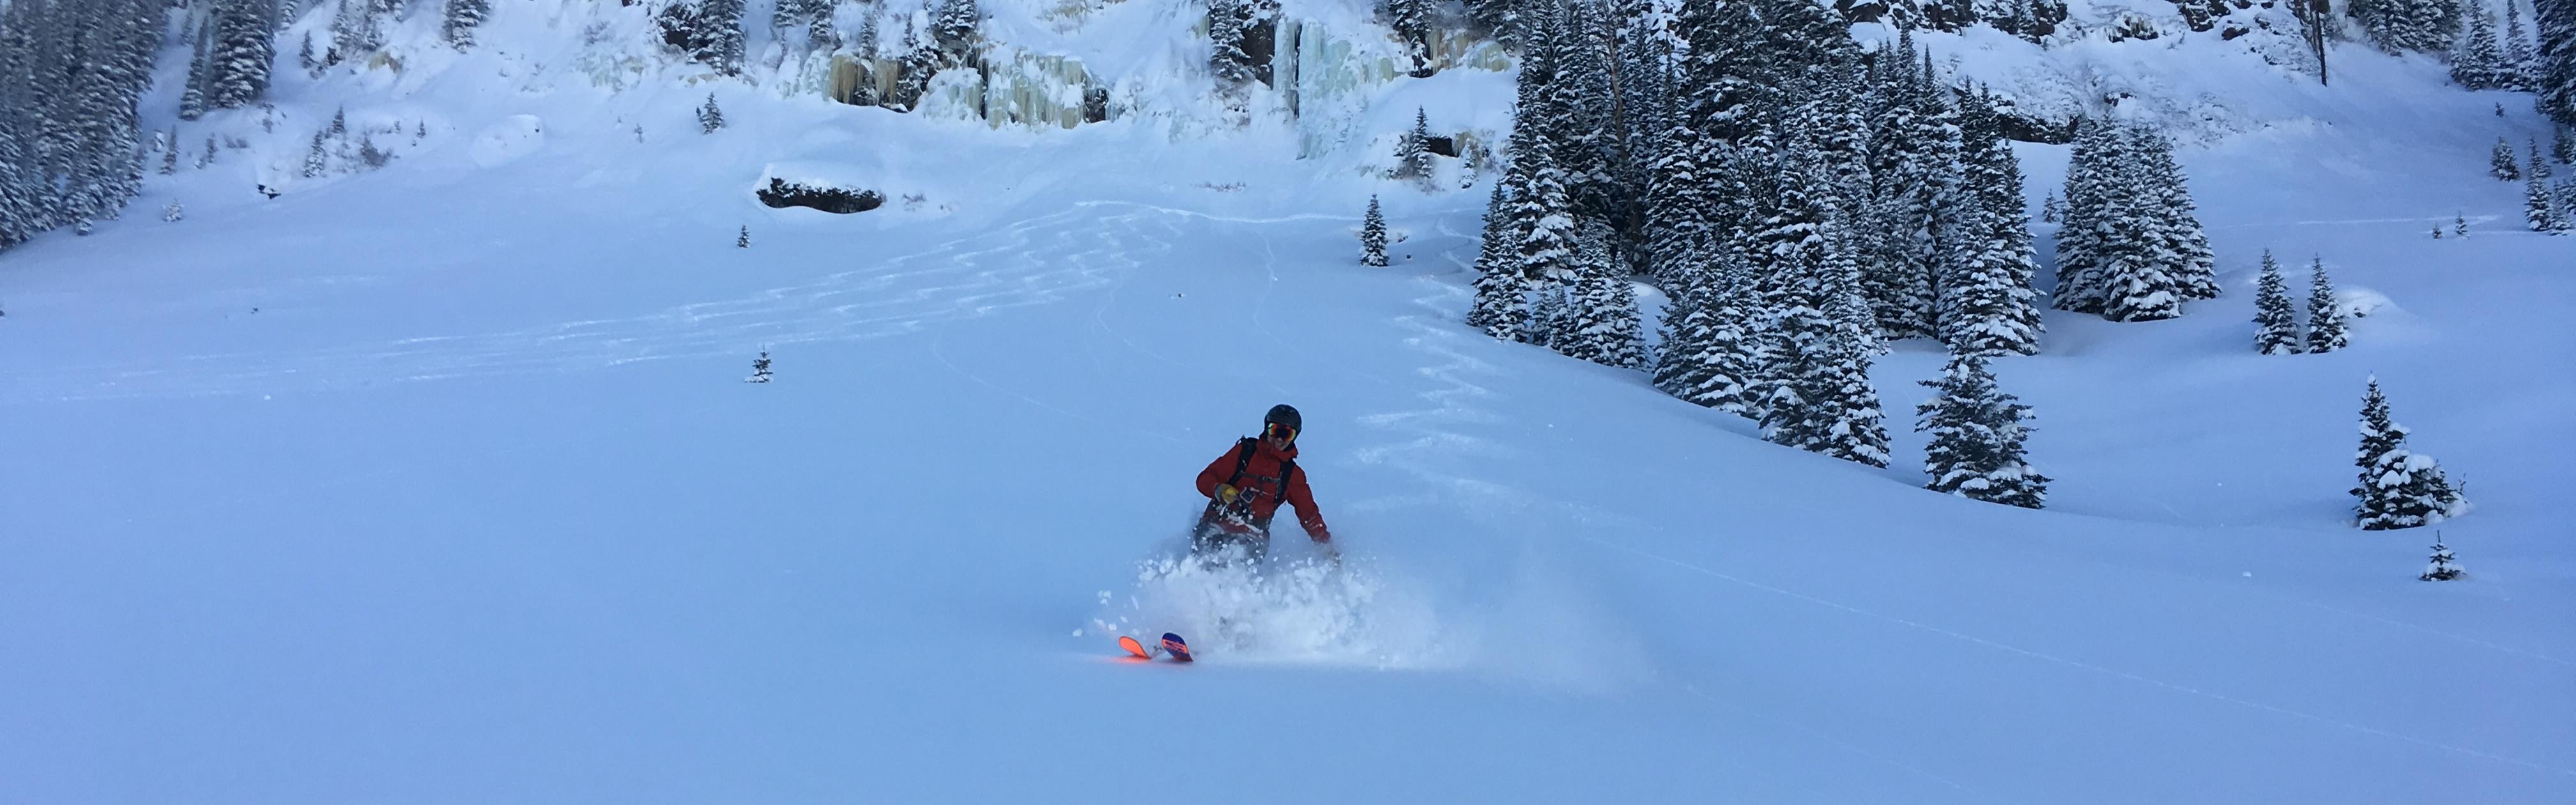 A skier gliding down a slope blanketed with powder snow